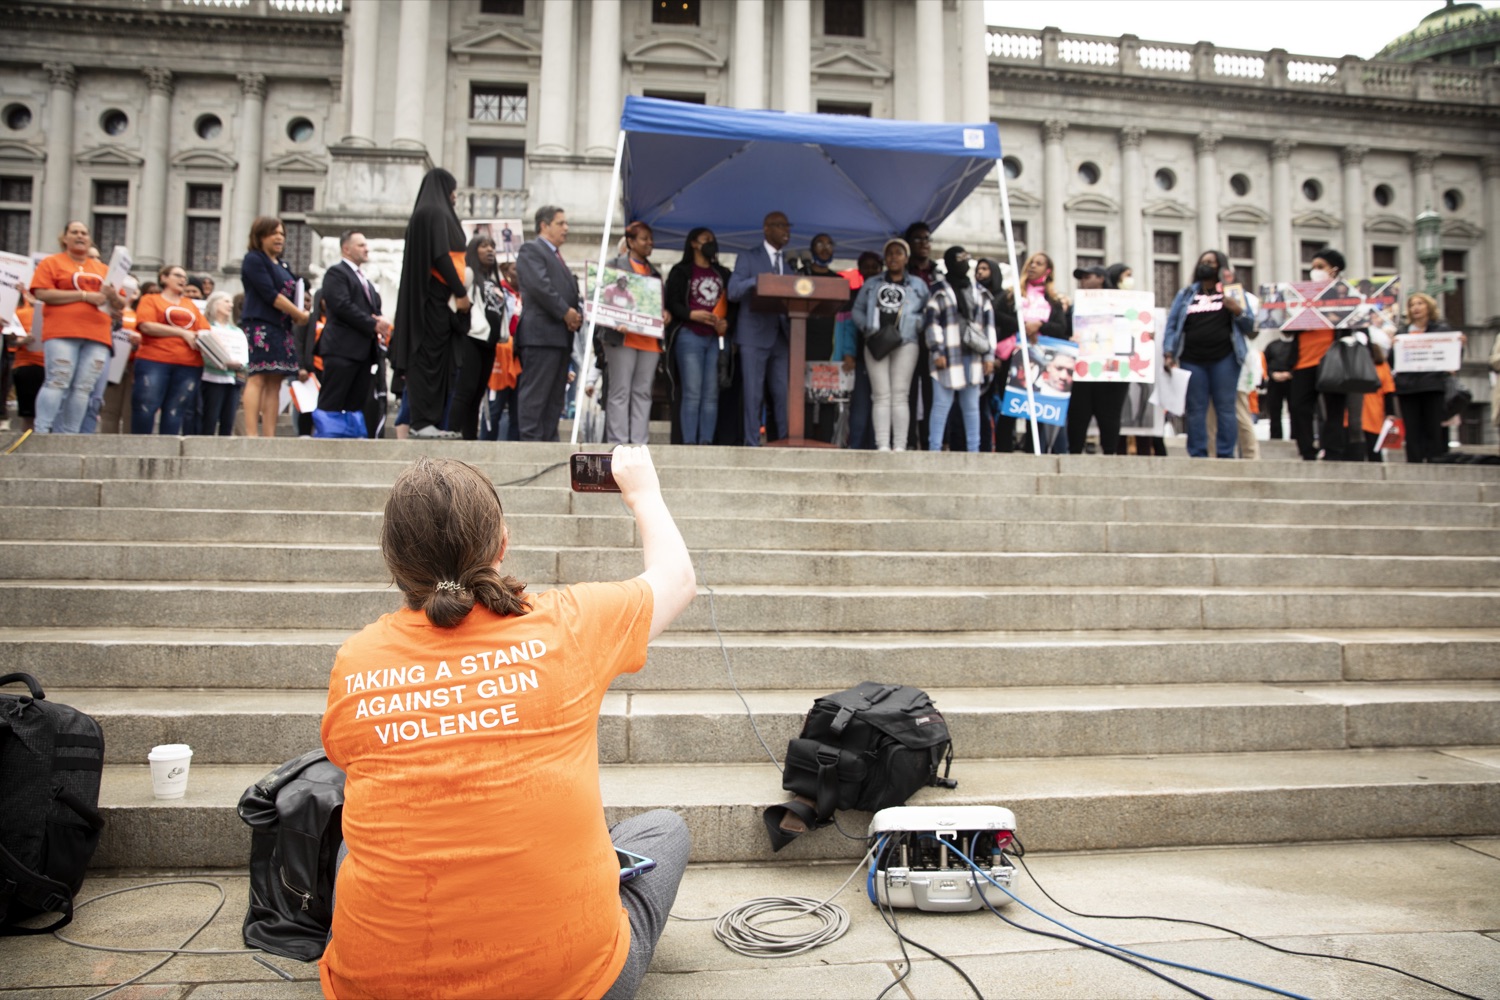 Governor Tom Wolf, joined by CeaseFirePA and more than 200 Pennsylvanians at the Capitol, calls for legislative action to save lives against gun violence, in Harrisburg, PA on April 26, 2022.<br><a href="https://filesource.amperwave.net/commonwealthofpa/photo/20782_gov_ceaseFirePA_08.JPG" target="_blank">⇣ Download Photo</a>